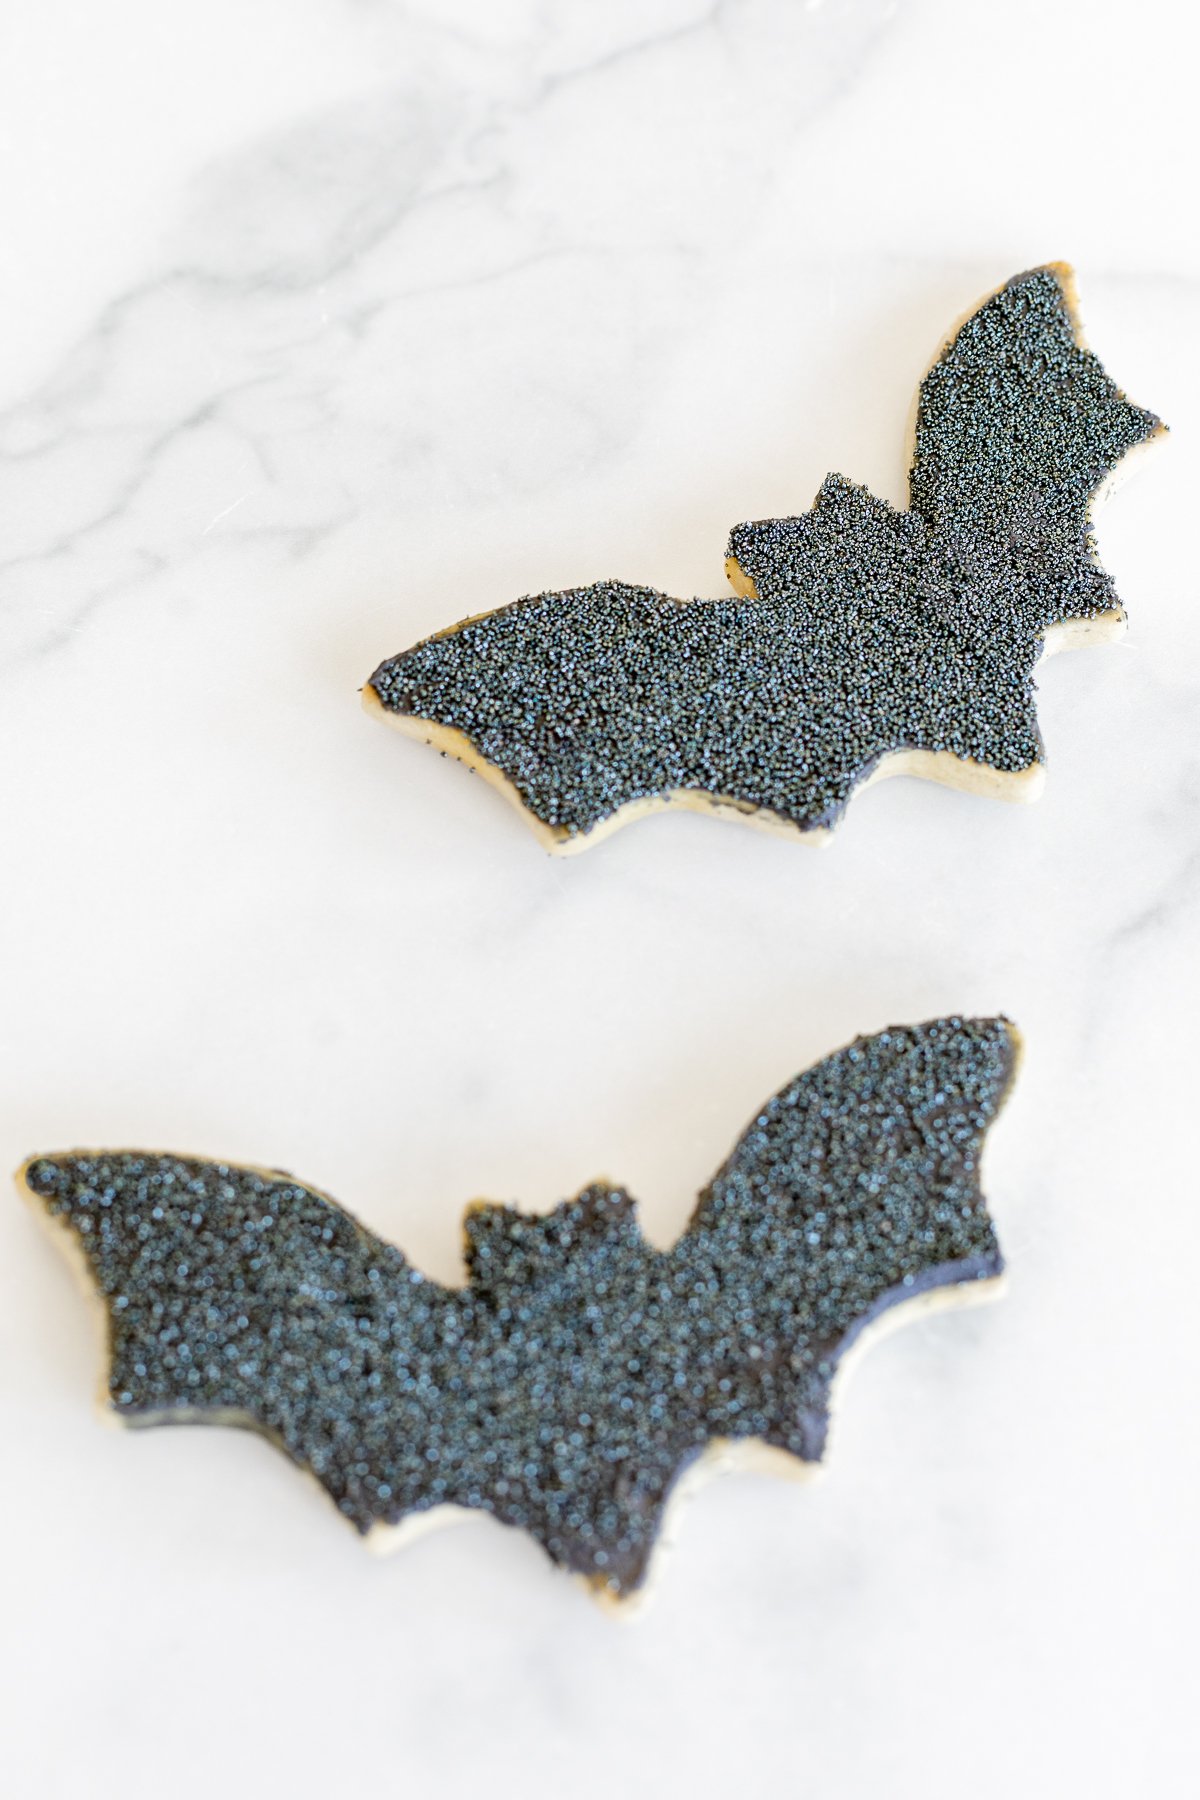 Two black bat Halloween sugar cookies on a white marble countertop.